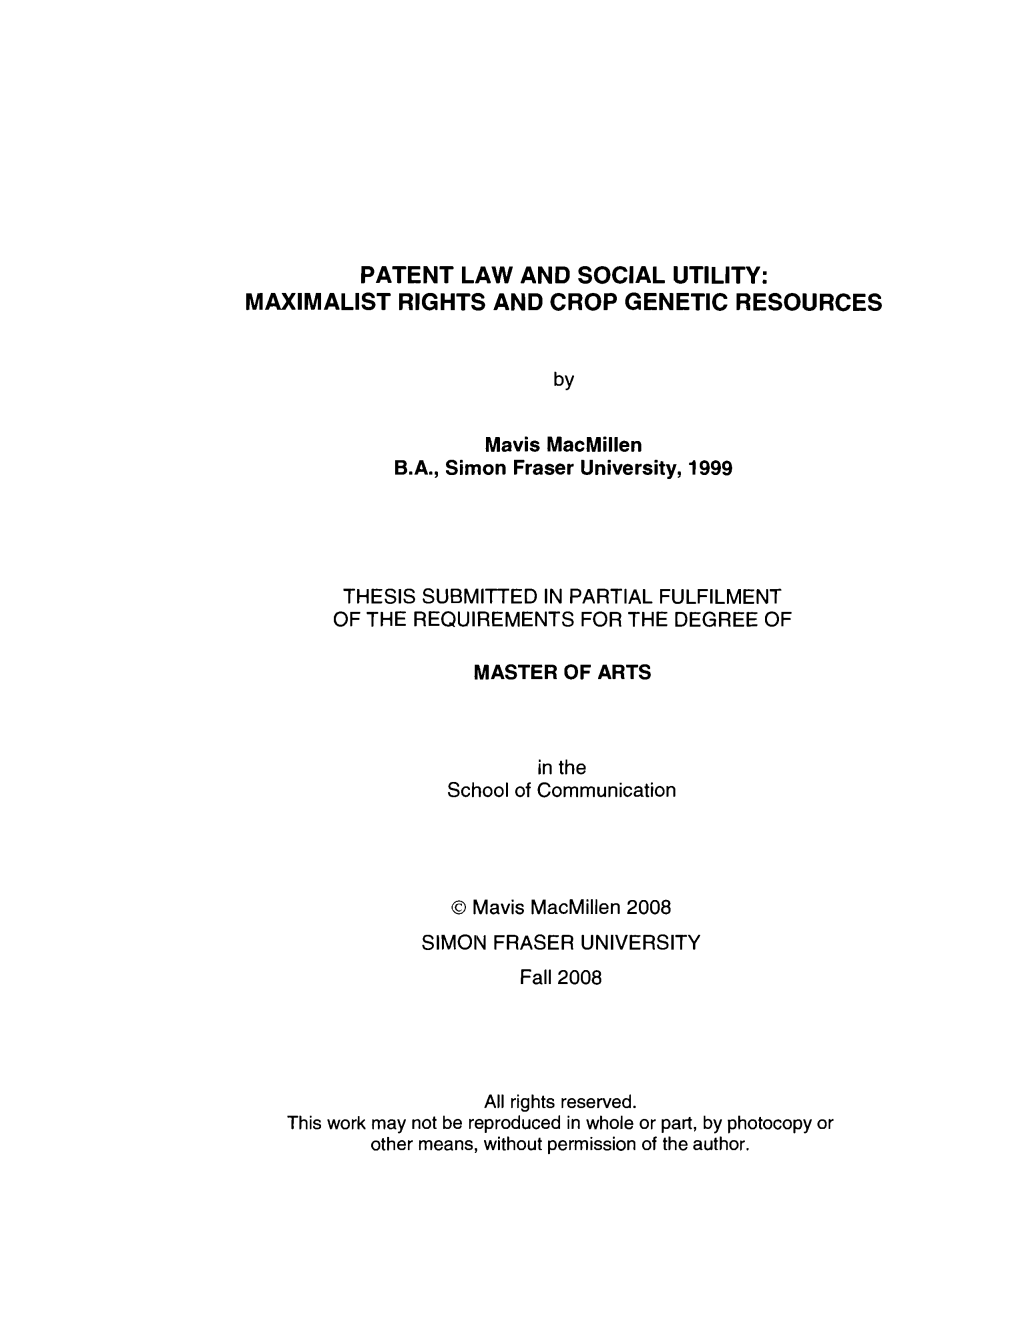 Patent Law and Social Utility: Maximalist Rights and Crop Genetic Resources